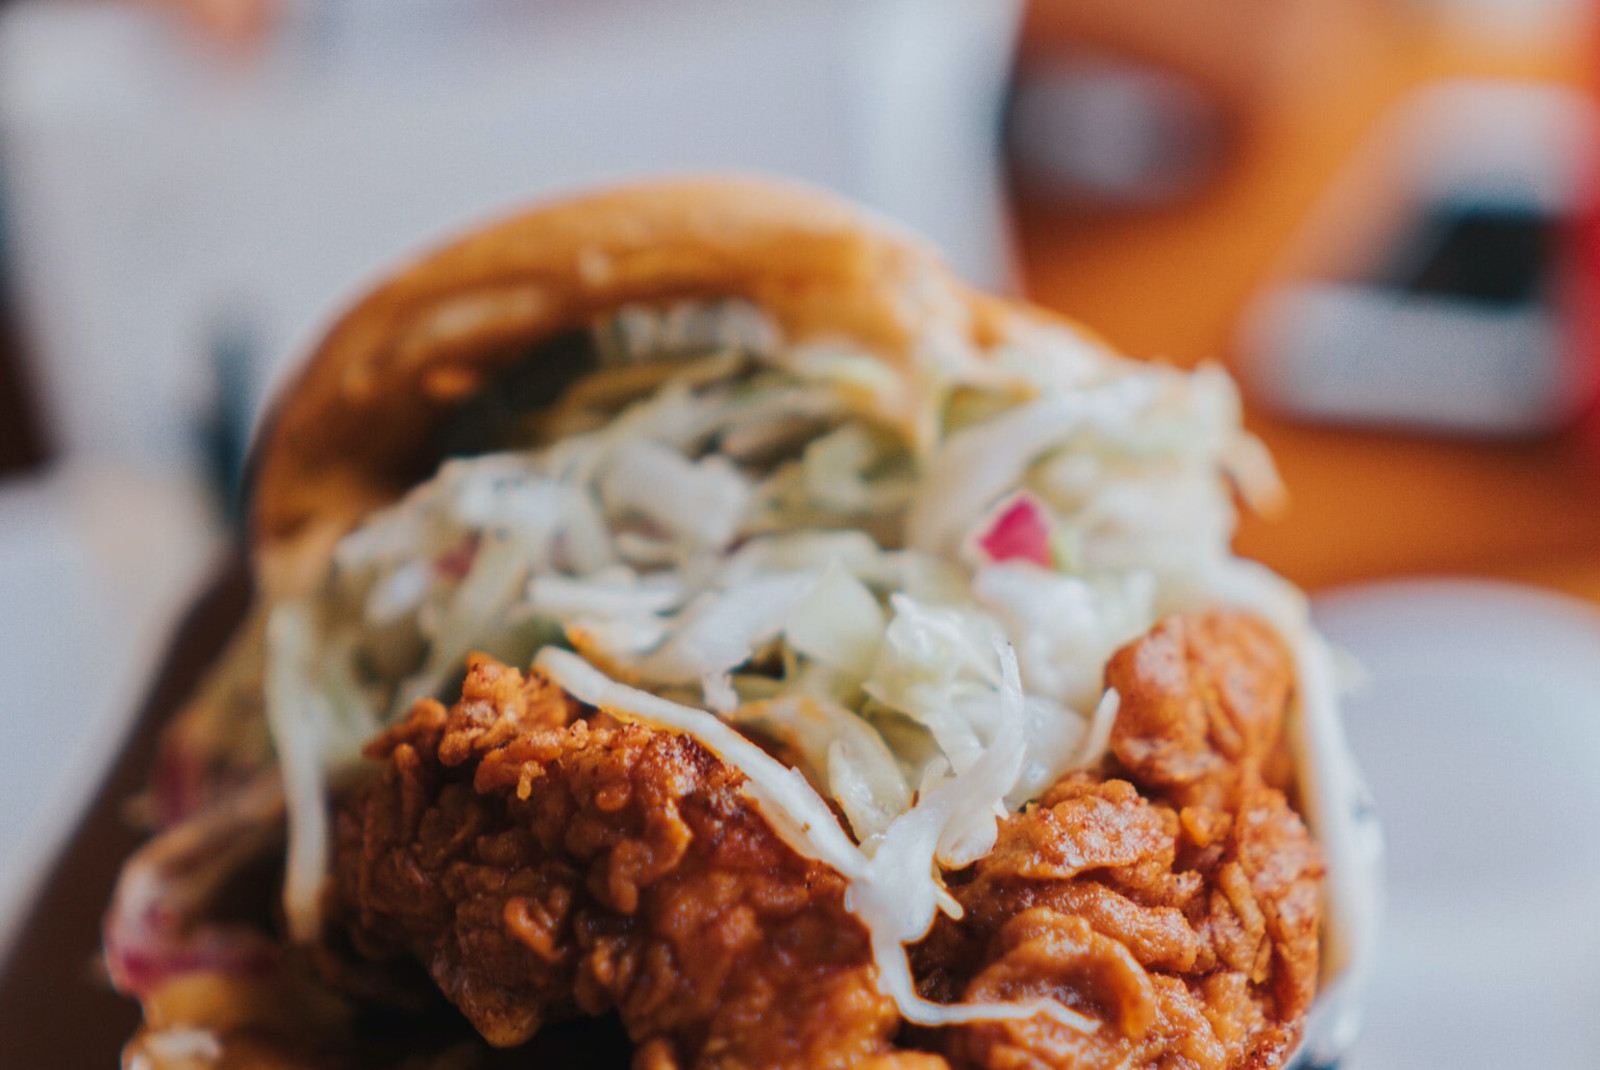 Sandwich with fried chicken and coleslaw